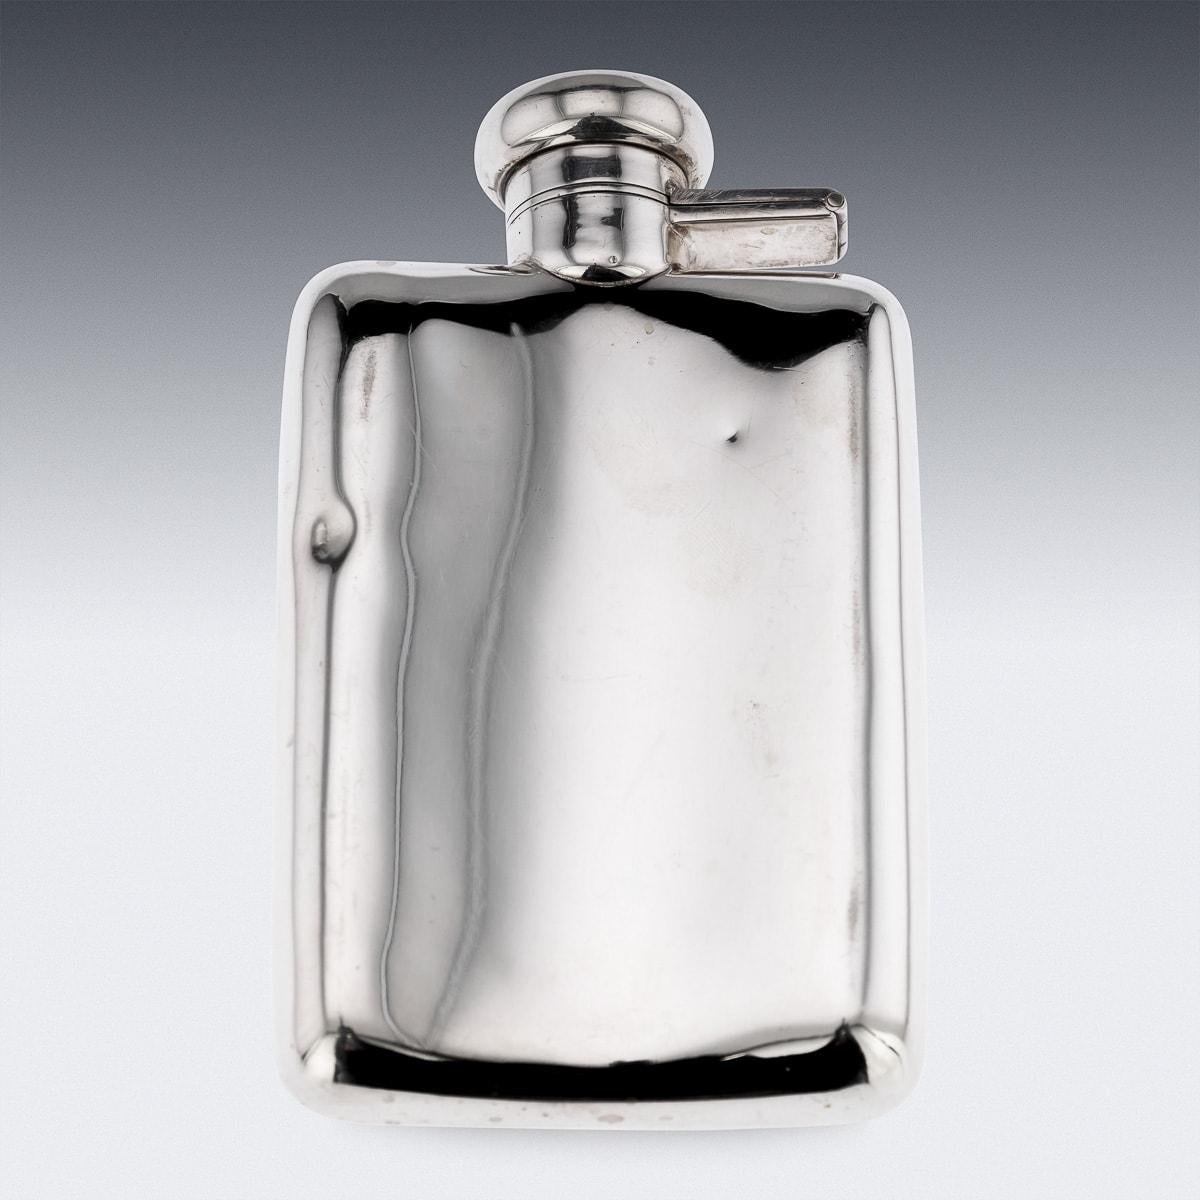 Antique early 20th Century English solid silver & enamel hip flask with silver hinged top. Beautifully hand painted with a polo player on polished ground. Hallmarked English silver (925 standard), Birmingham, year 1924 (z), Makers